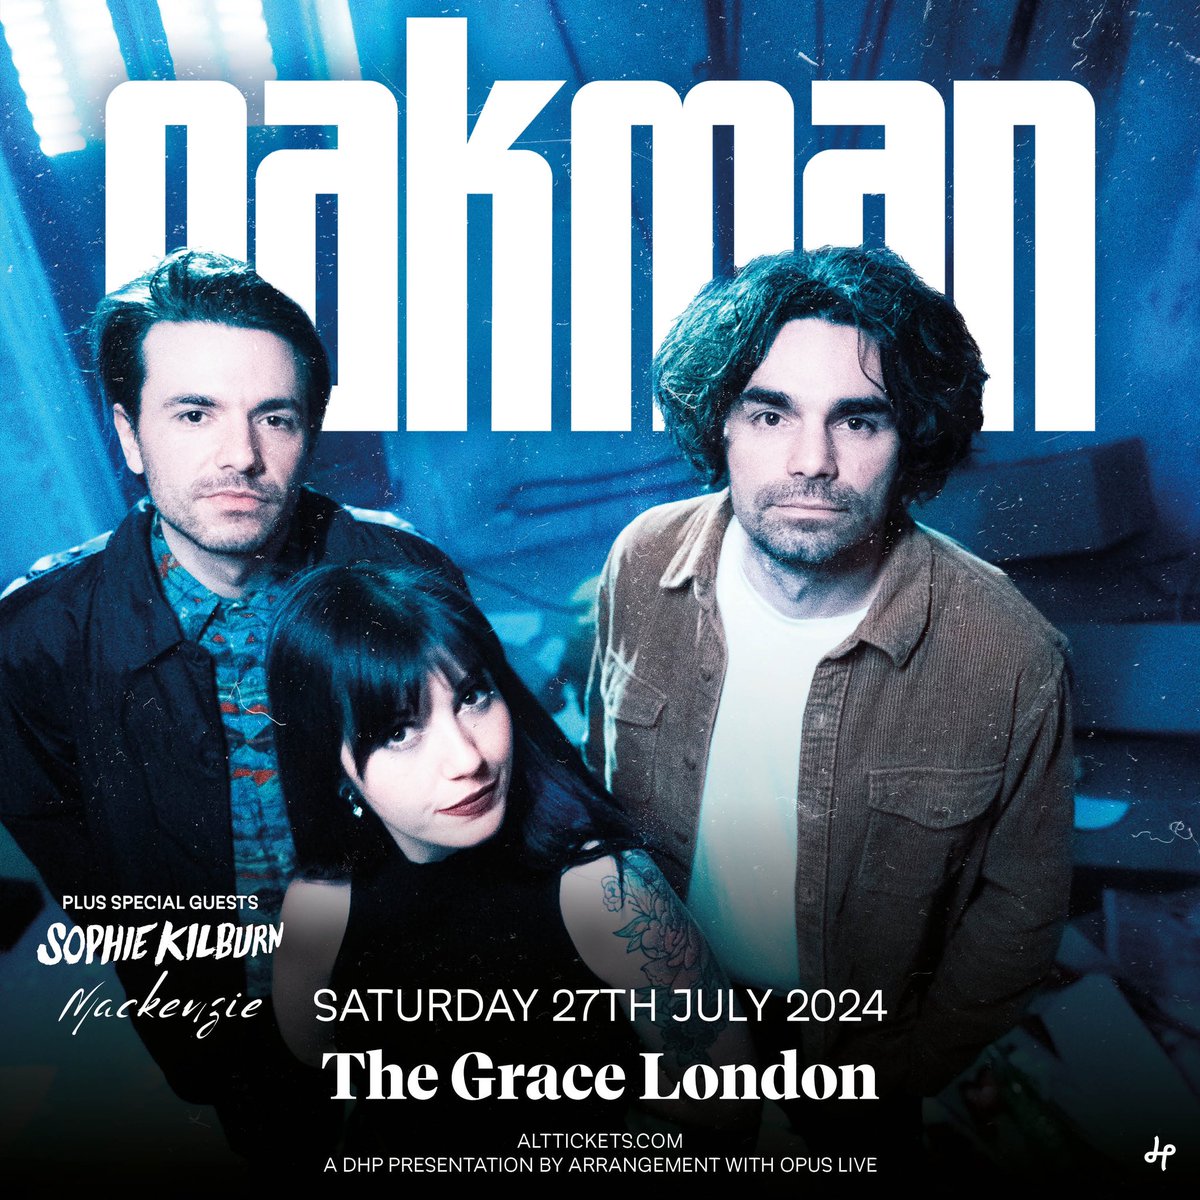 London friends! @SophieKilburn & Mackenzie are joining us for our headline show on July 27th at @thegraceldn ! We’re incredibly excited to play in London and play our new songs for you! Grab your tickets and make sure to bring your crew along! Let’s make it a night to remember 🥰